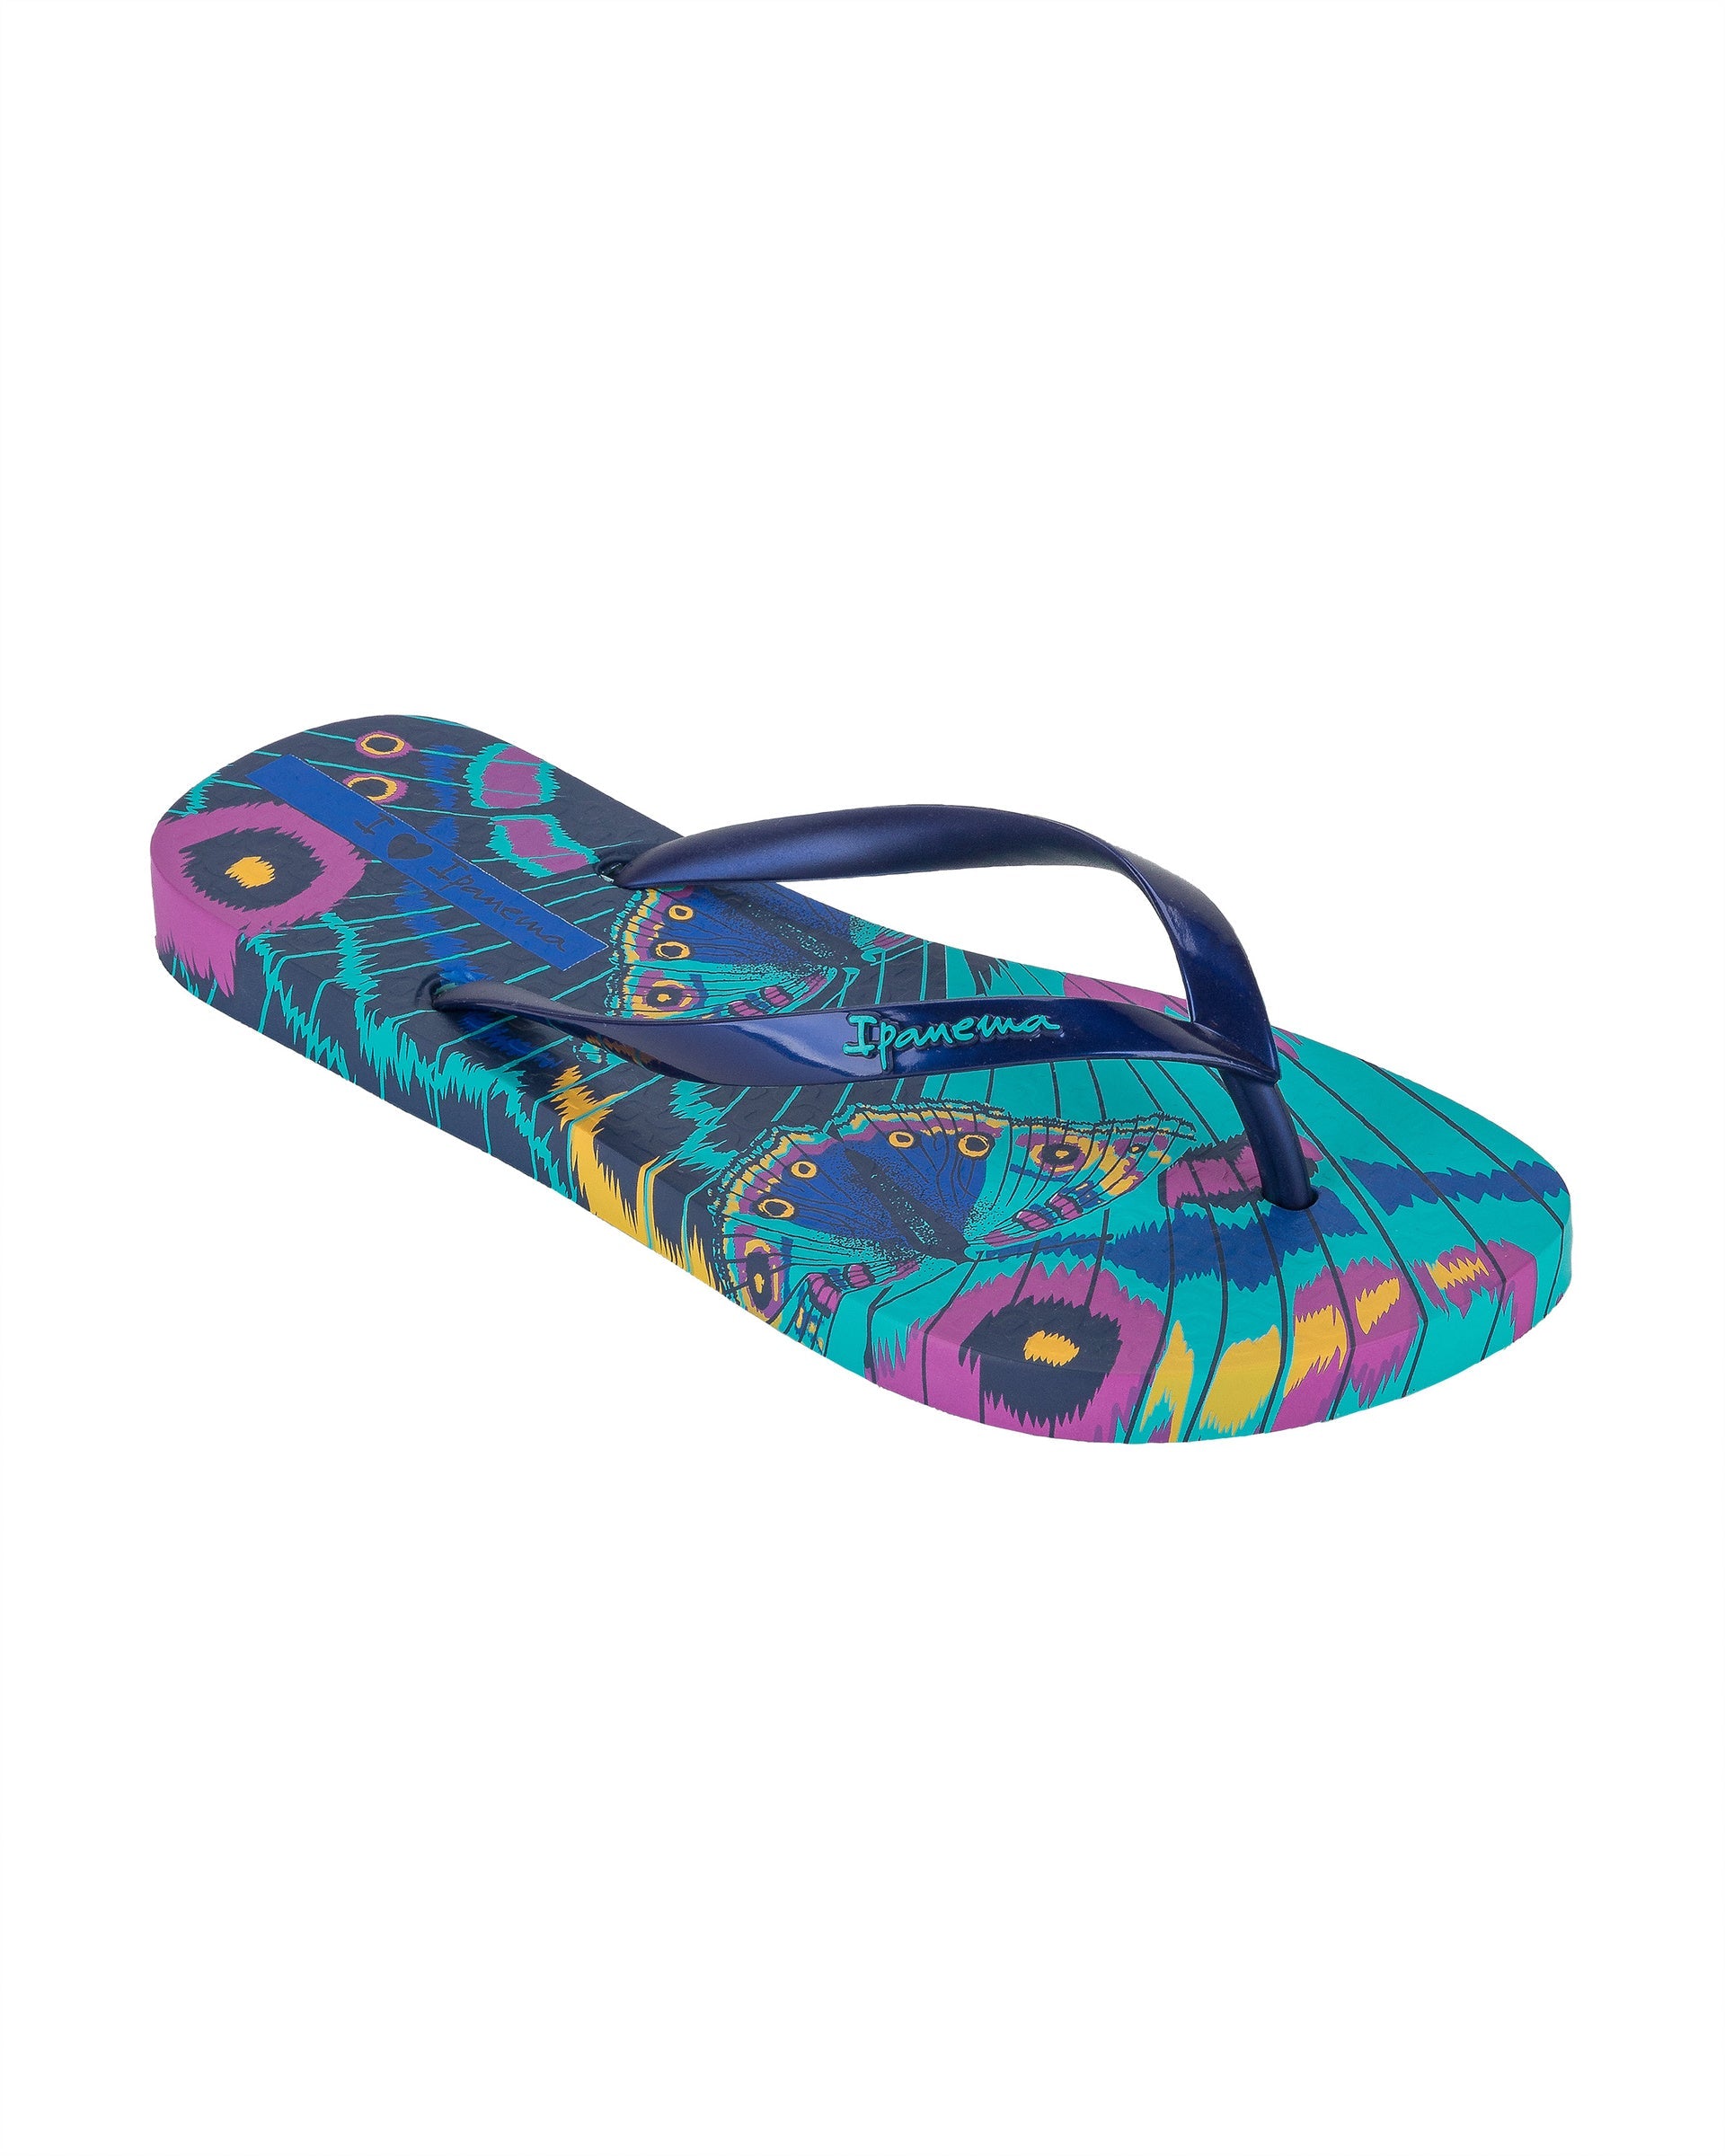 Angled view of a blue Ipanema Animal Print women's flip flop with glitter blue straps and butterfly sole print.